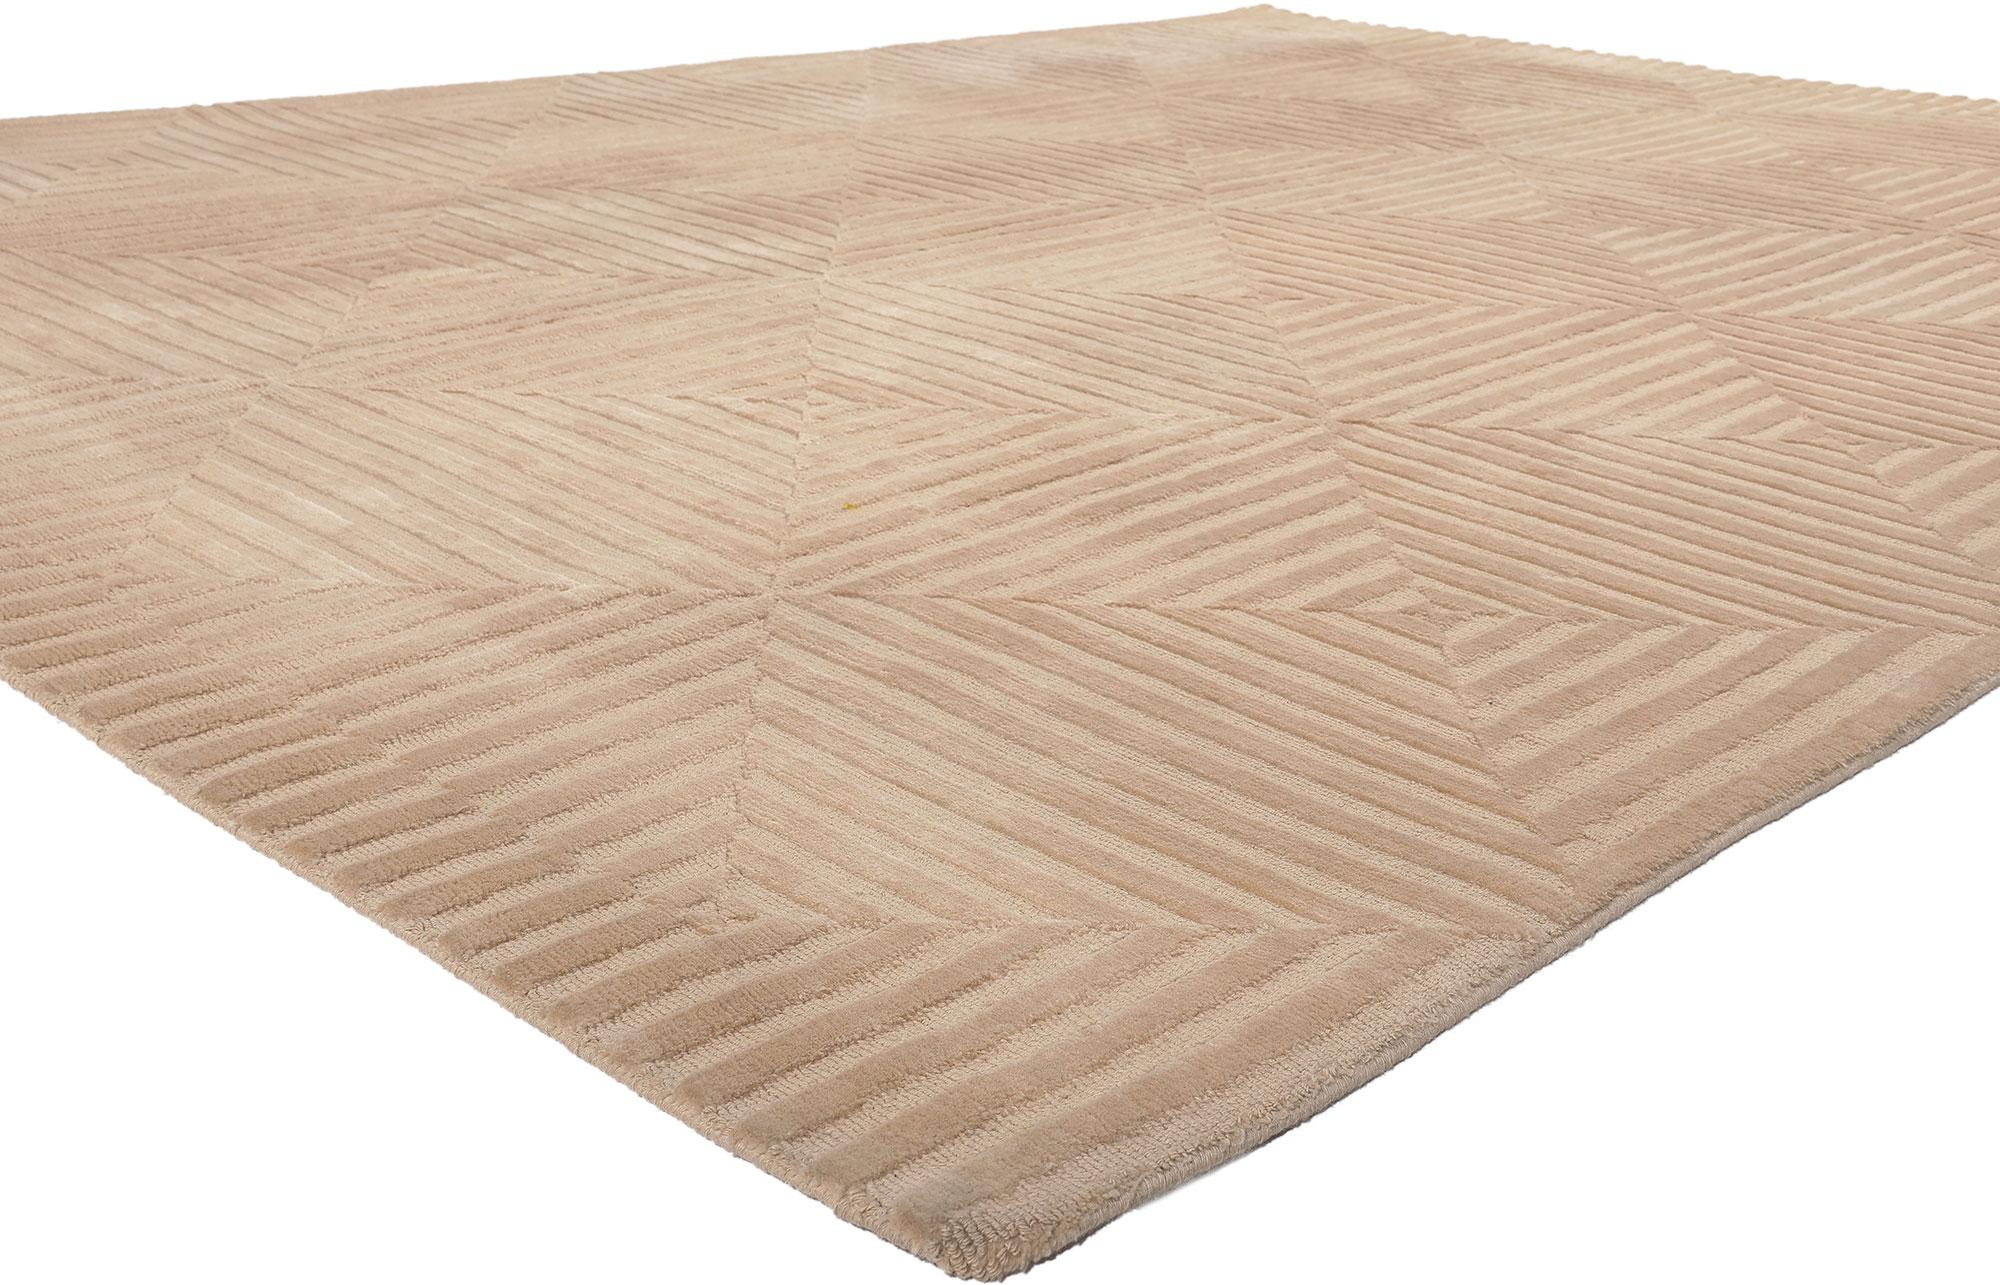 77307 Vintage Tibetan High-Low Rug, 08'07 x 11'04.
Subtle Shibui meets sublime simplicity in this hand knotted wool vintage Tibetan high-low rug. The zen-like silhouette and neutral colors woven into this piece work together resulting in a warm,